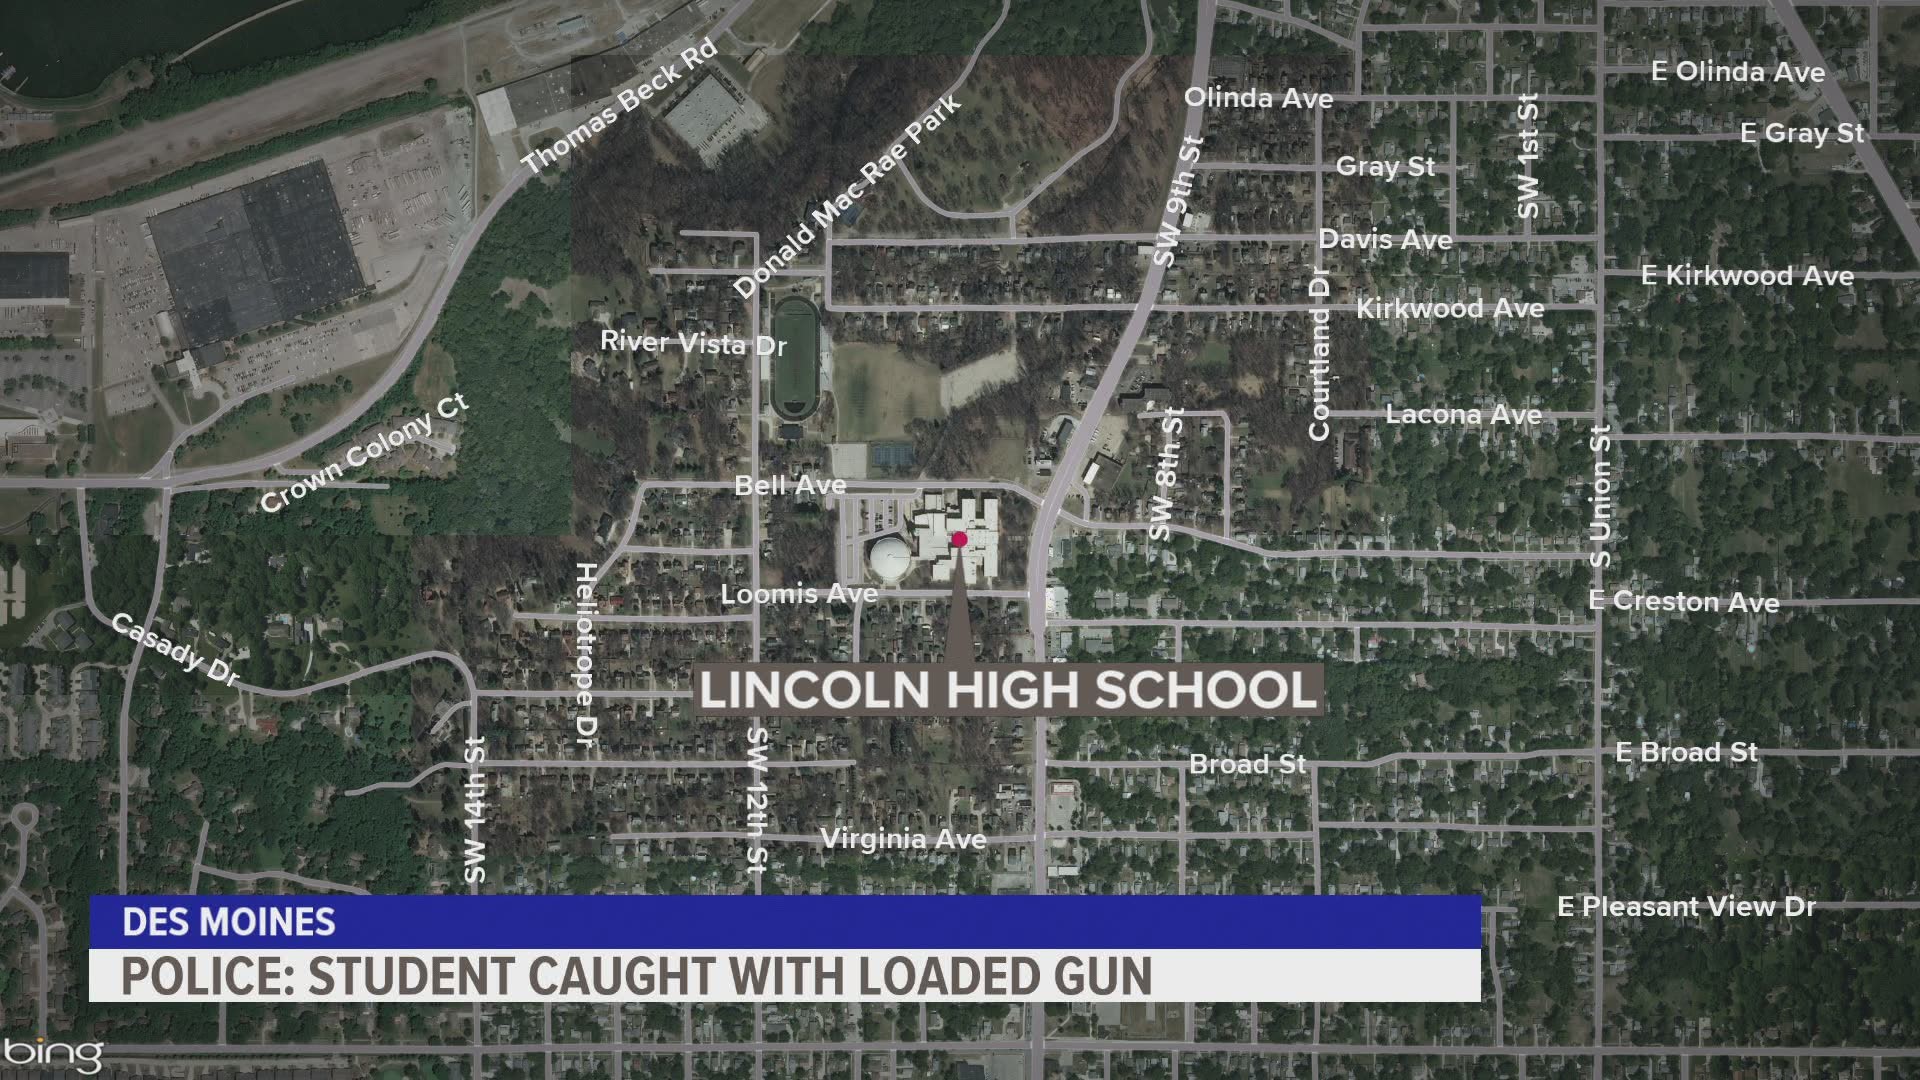 Officers were called to Lincoln High School Tuesday about the incident.